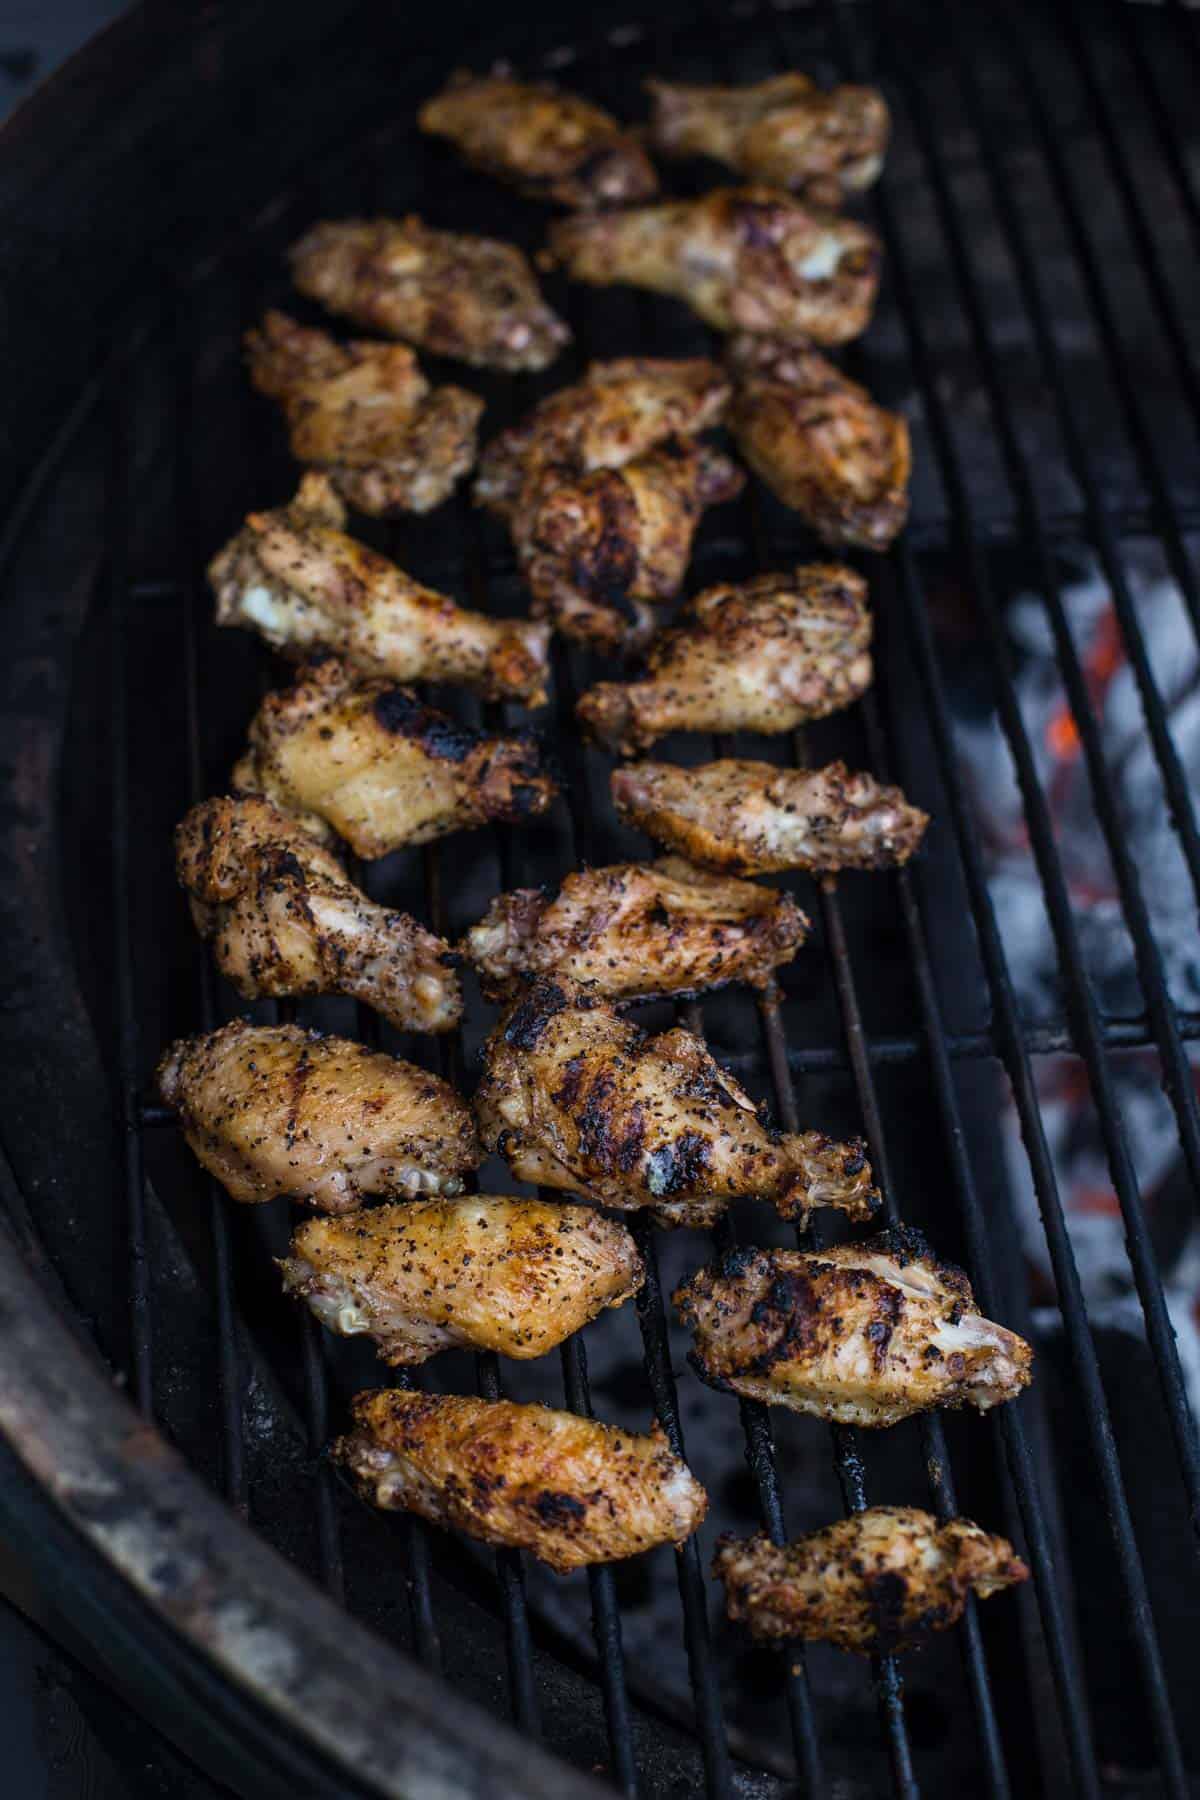 Grilling Chicken Wings over indirect heat